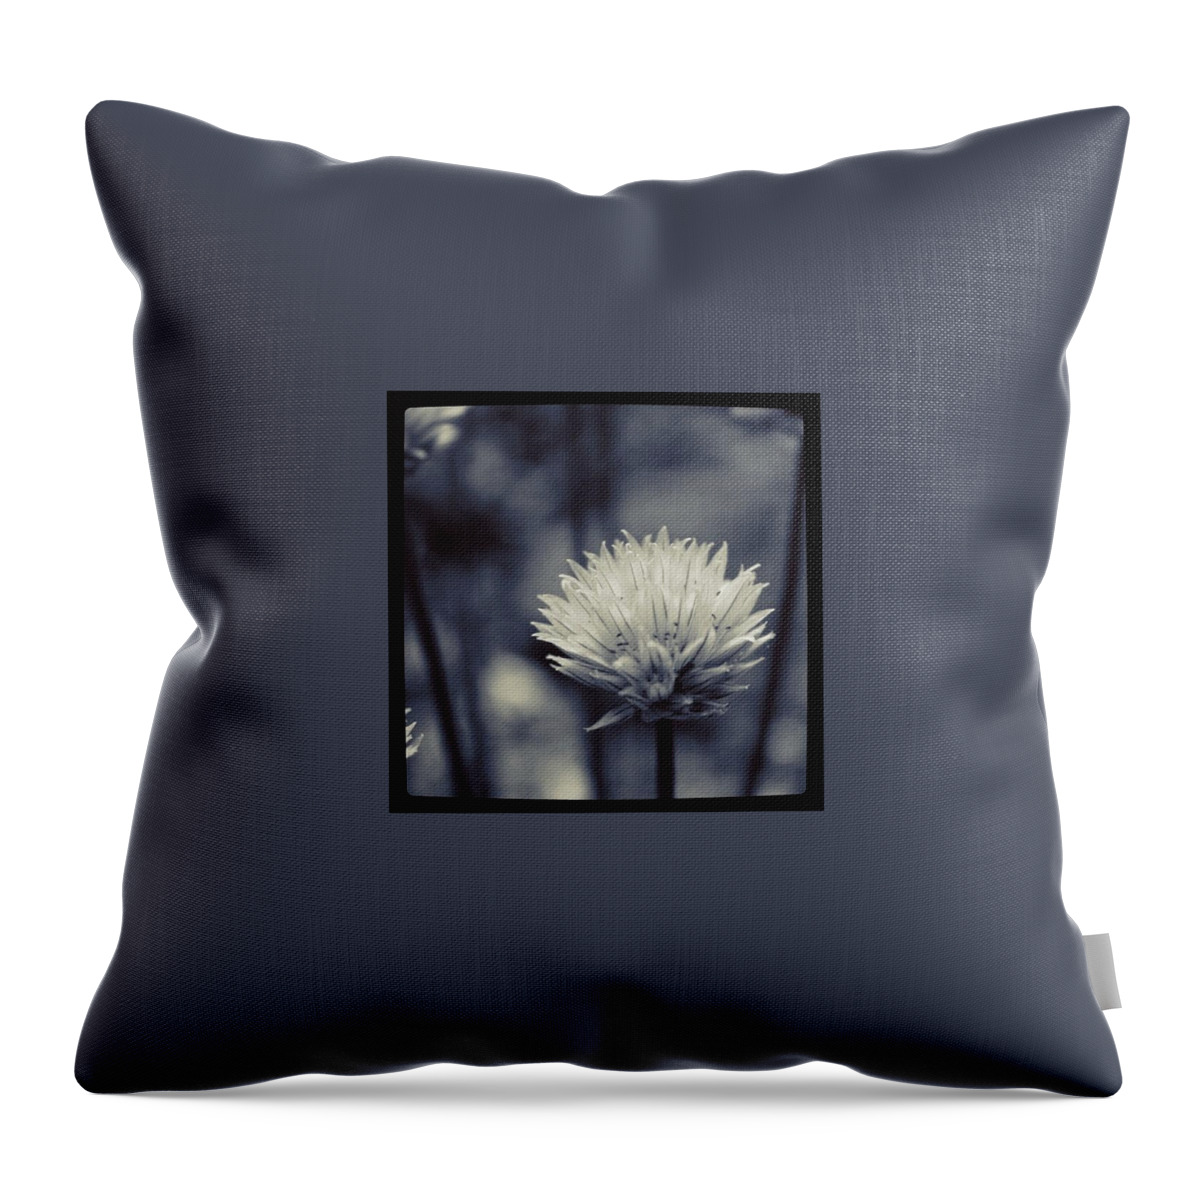 Baw Throw Pillow featuring the photograph #bw #bnw #noir #blackandwhite by Justin Connor